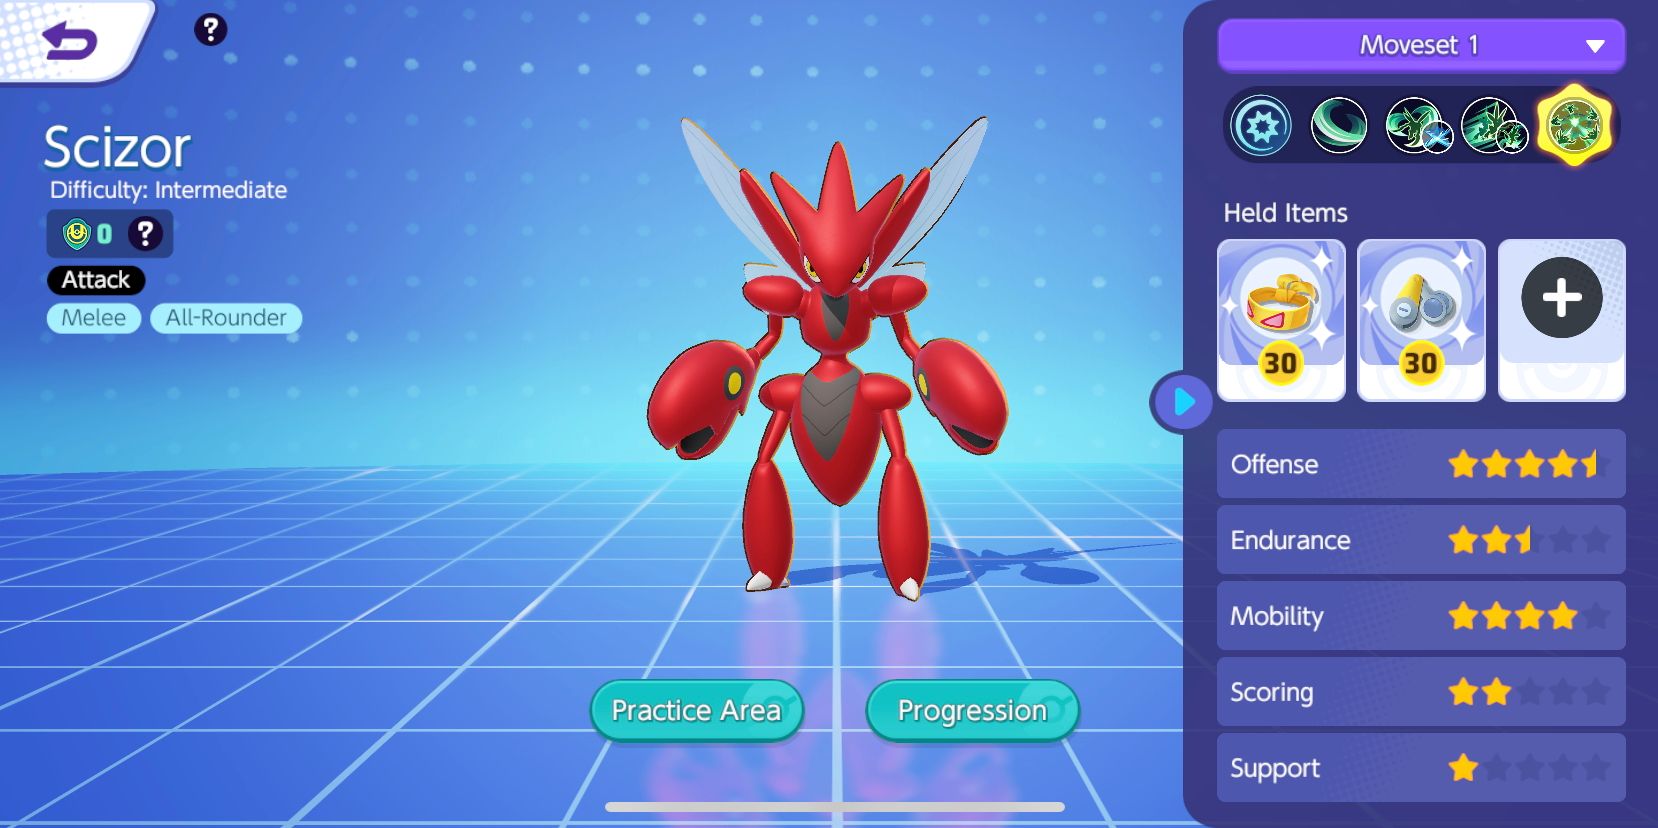 Scizor's stat screen from Pokemon Unite, showing its stats and Held Items